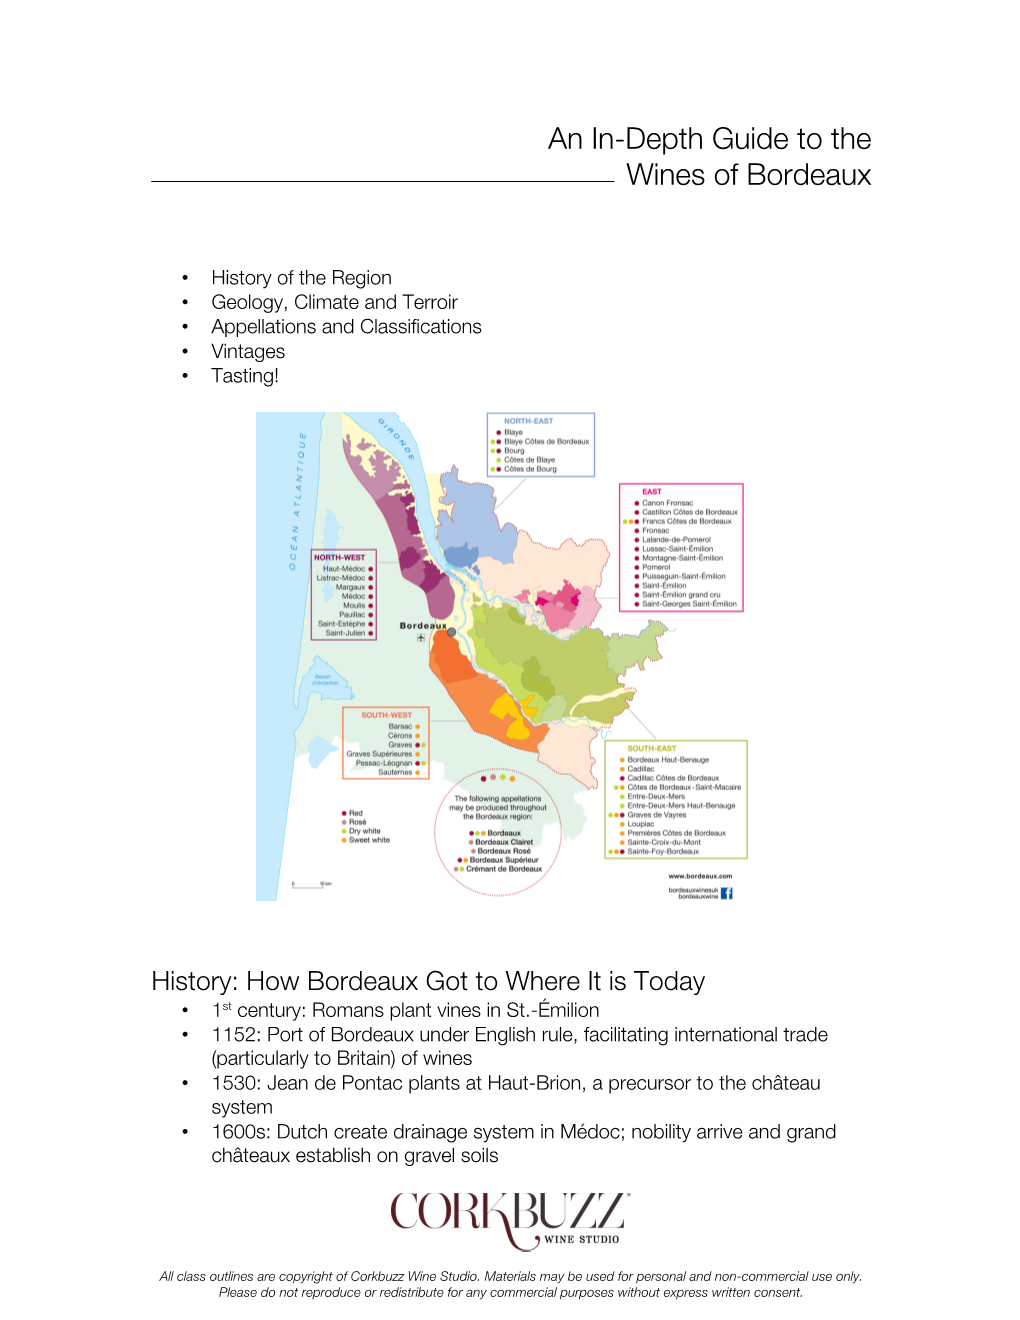 An In-Depth Guide to the Wines of Bordeaux